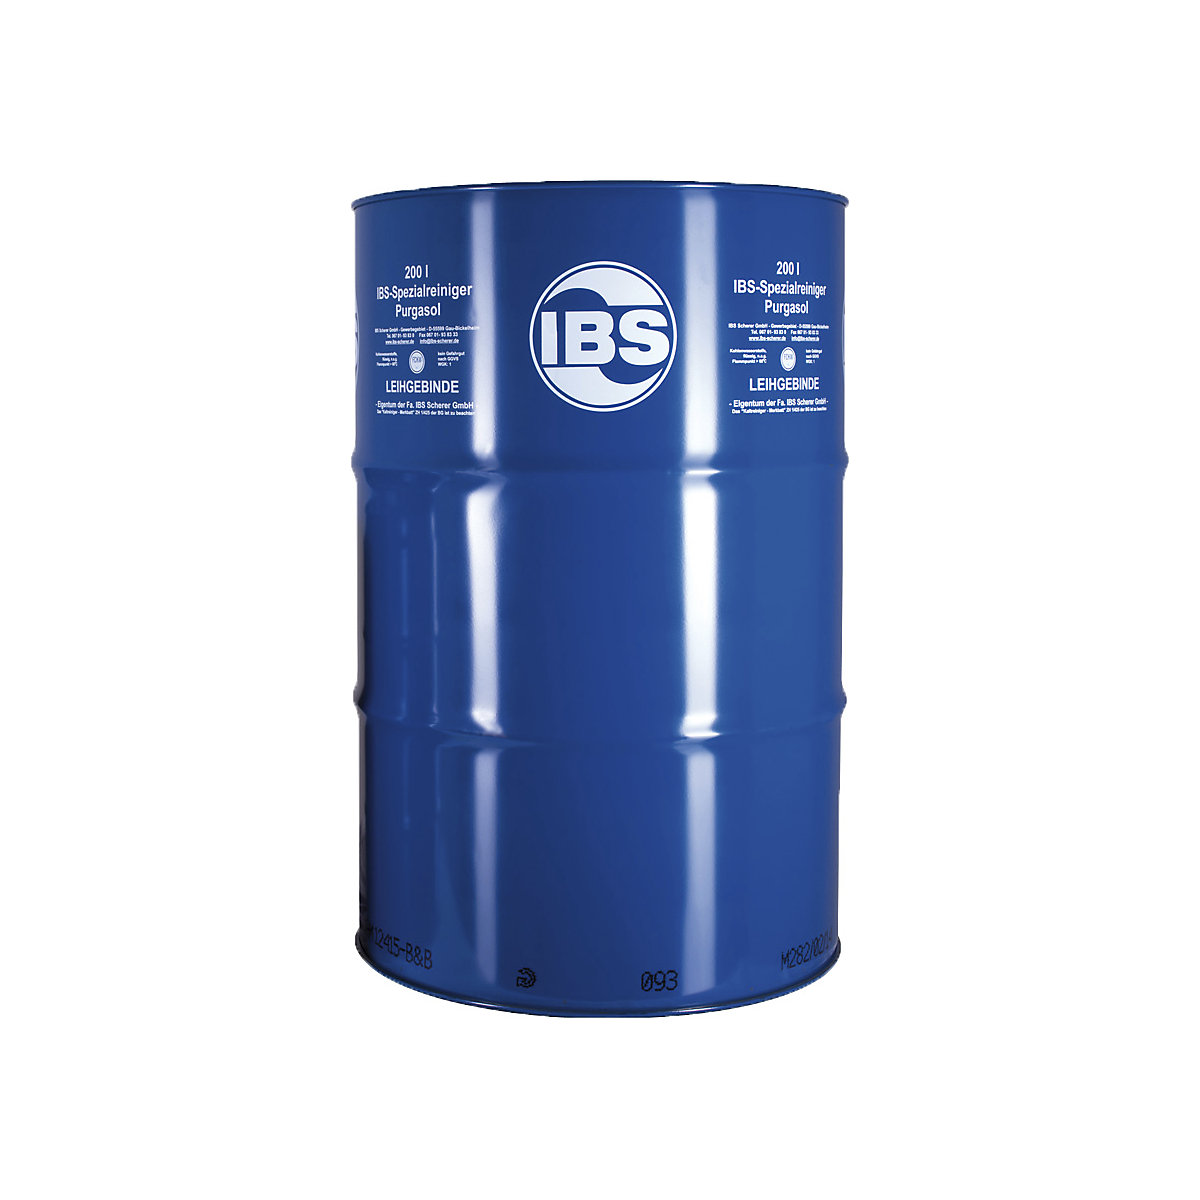 PURGASOL special cleaning solution – IBS Scherer, for oil and grease stains, contents 200 l-2